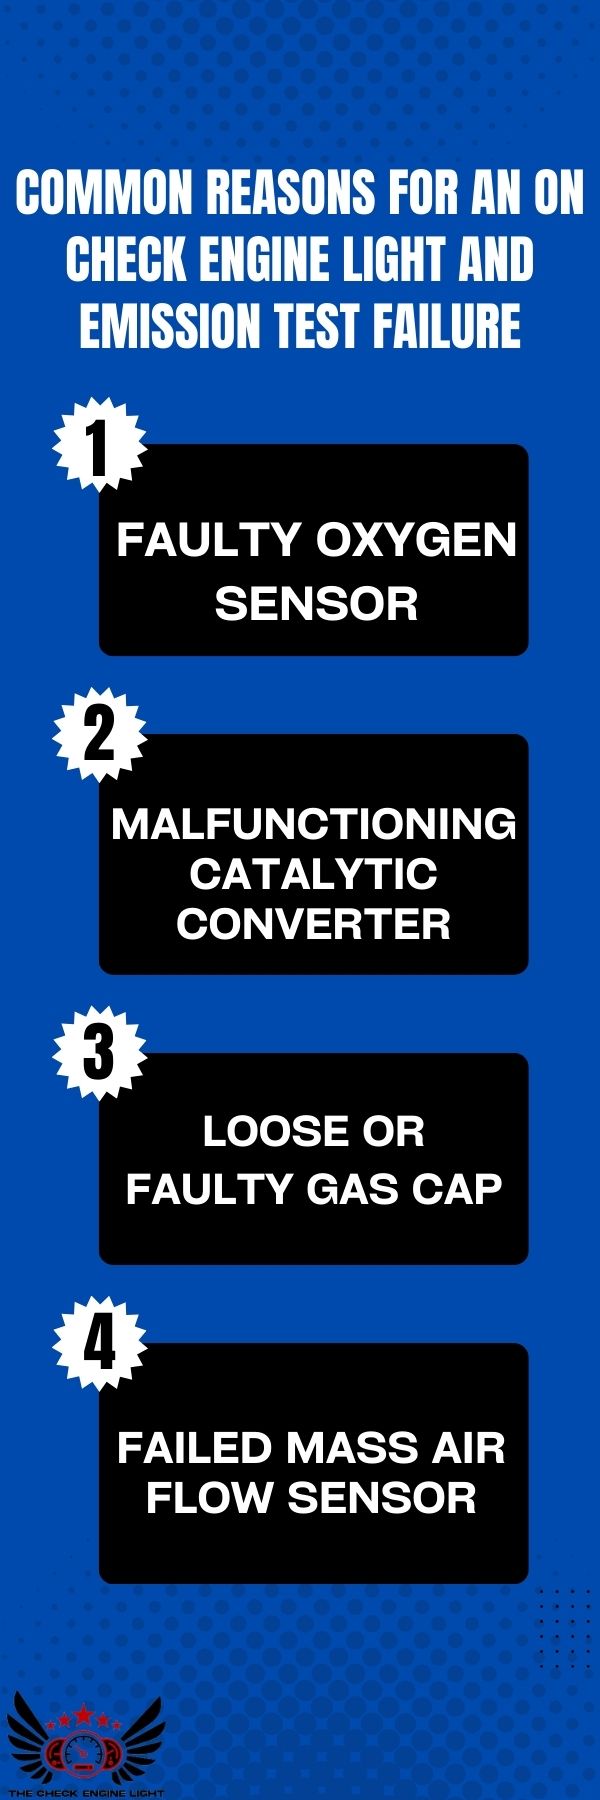 infographic about Common Reasons for-An On Check Engine Light and Emission Test Failure